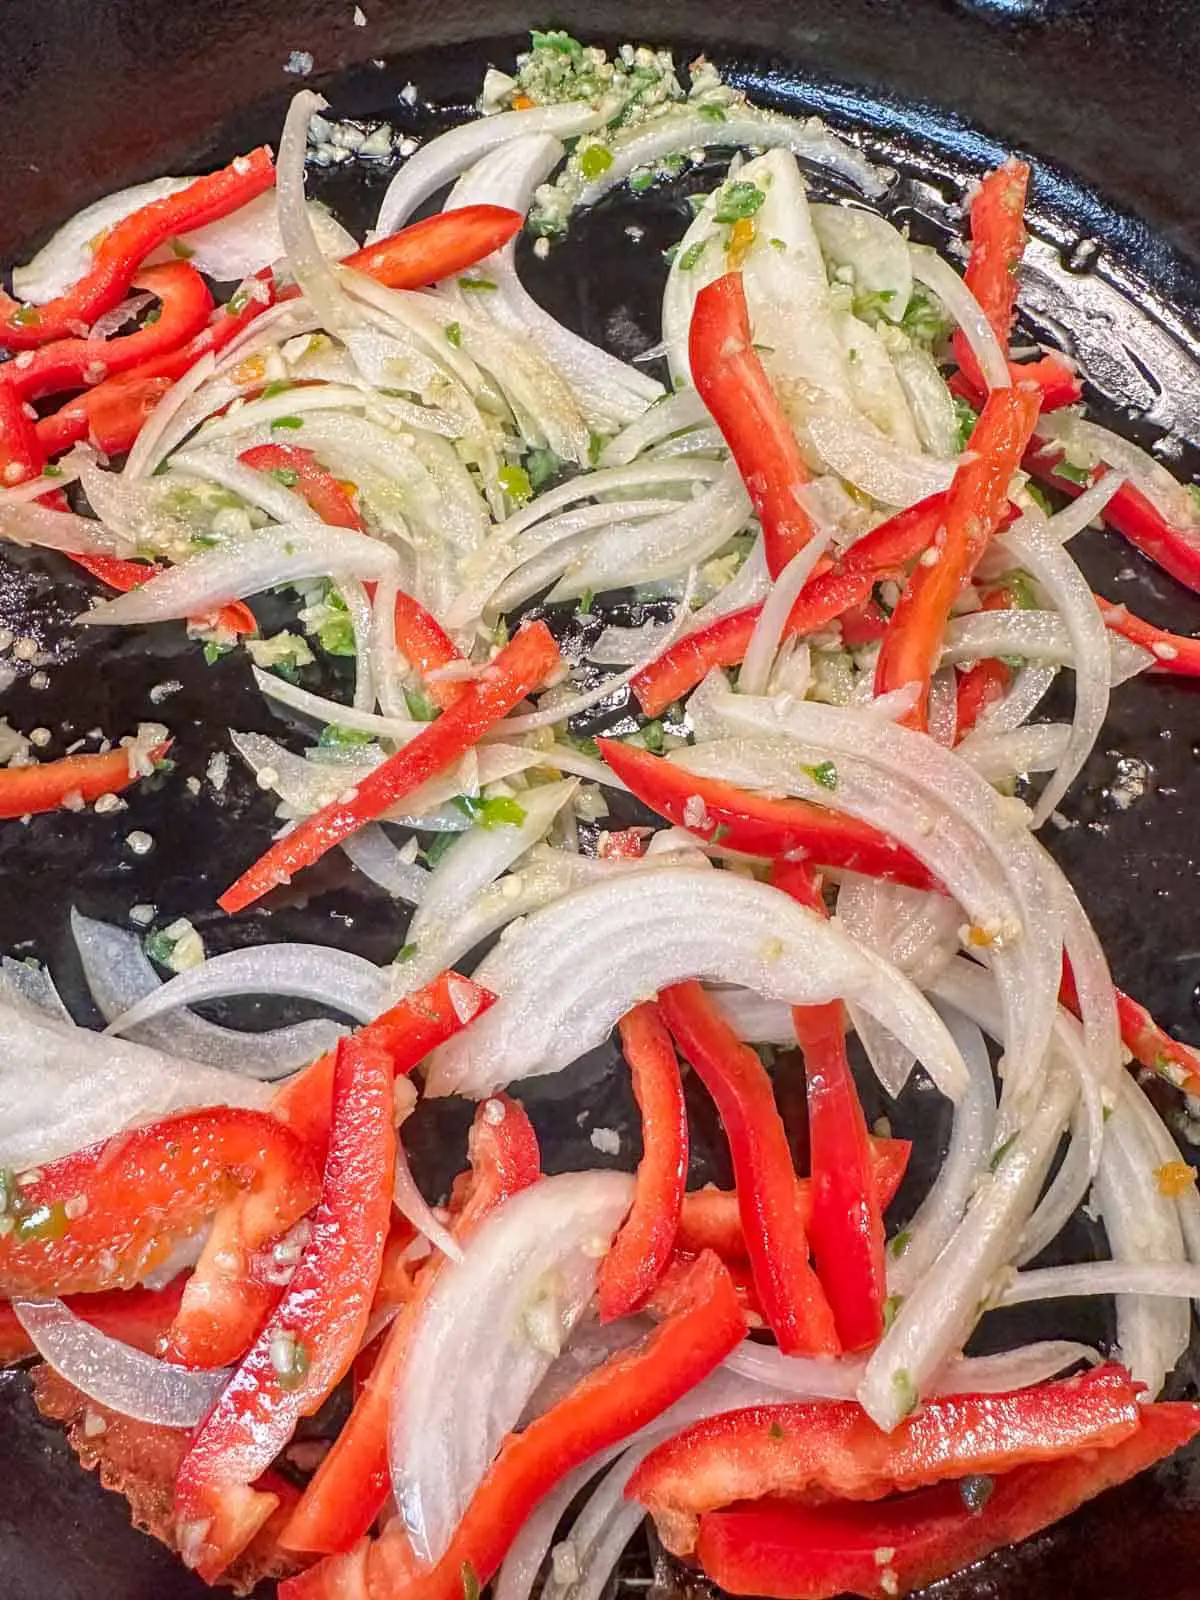 Sliced red bell pepper and onion with minced garlic and minced Thai chilis.